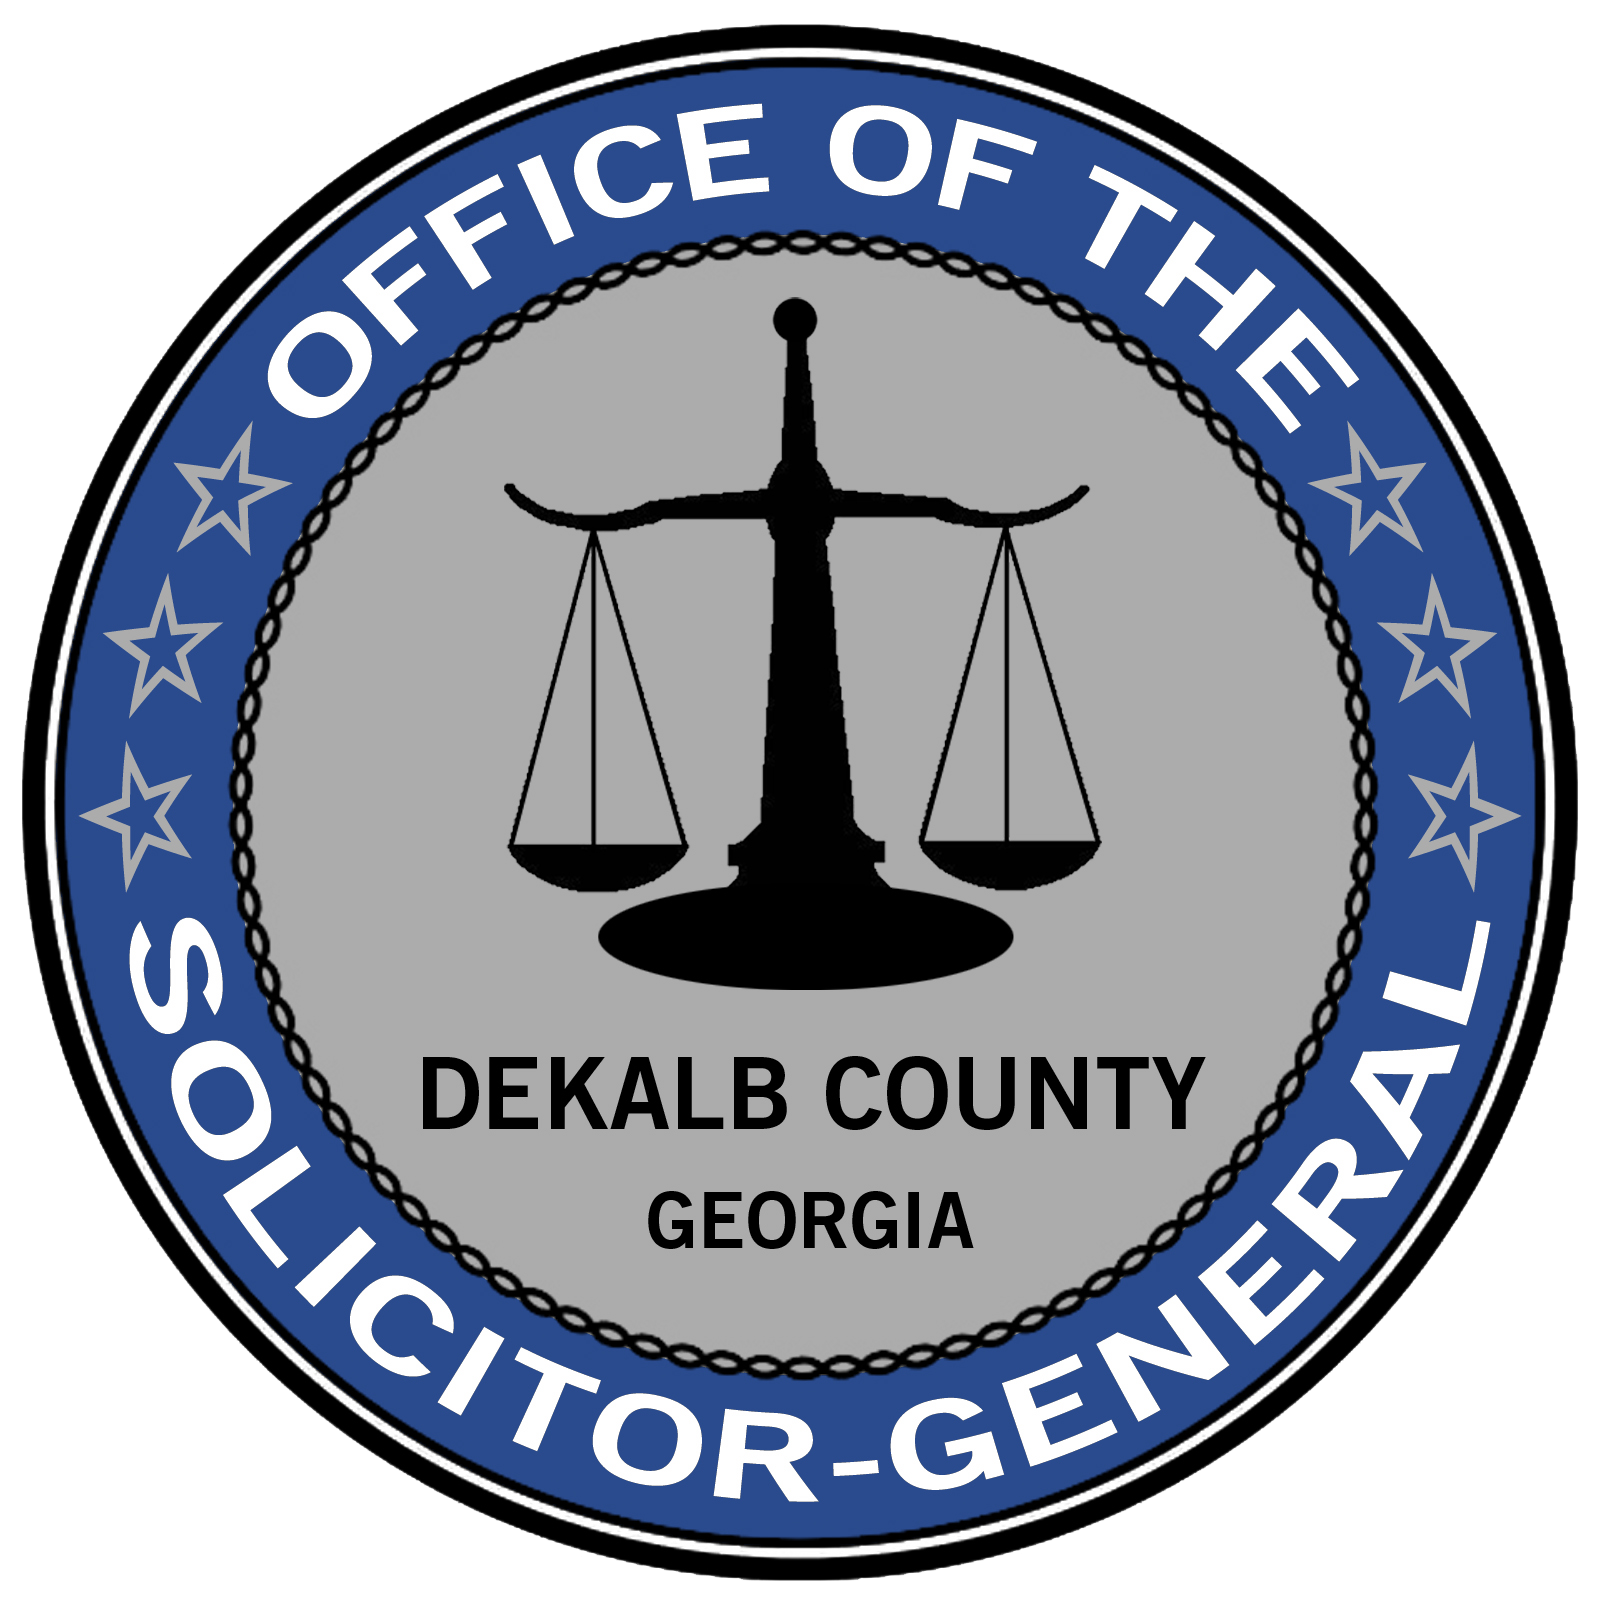 Solicitor- General Seal